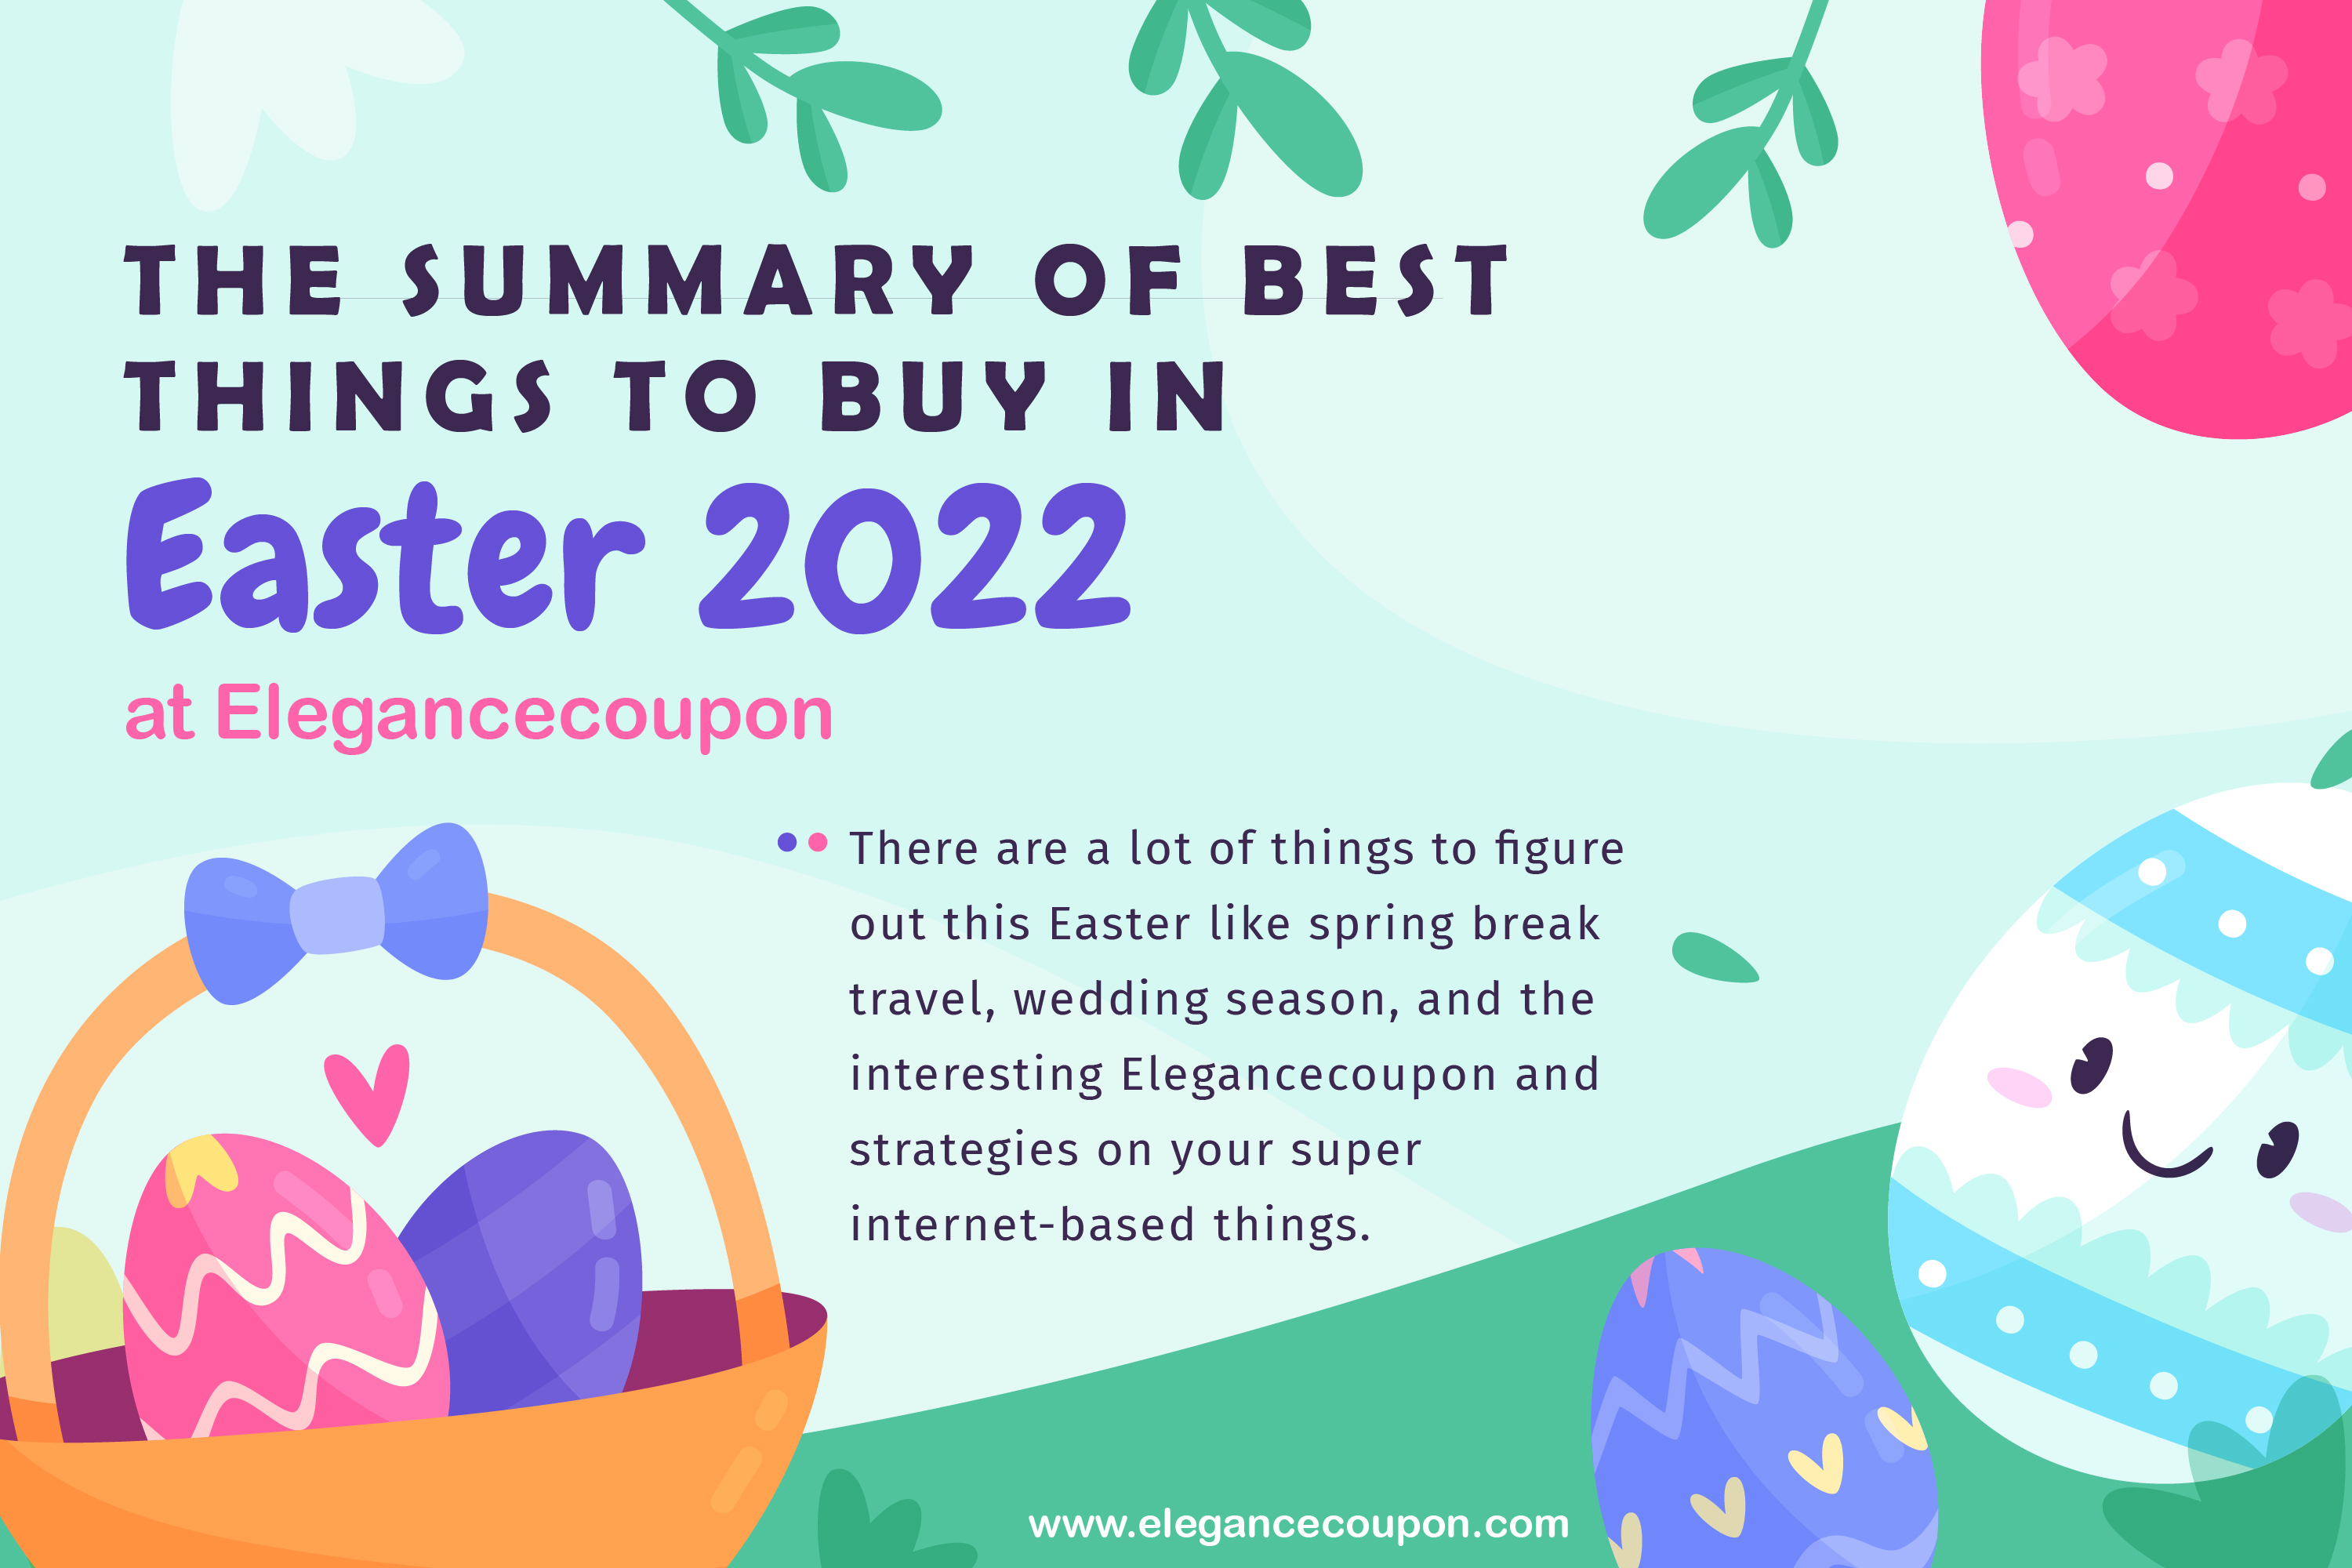 The summary of best things to buy in Easter 2022 at Elegancecoupon